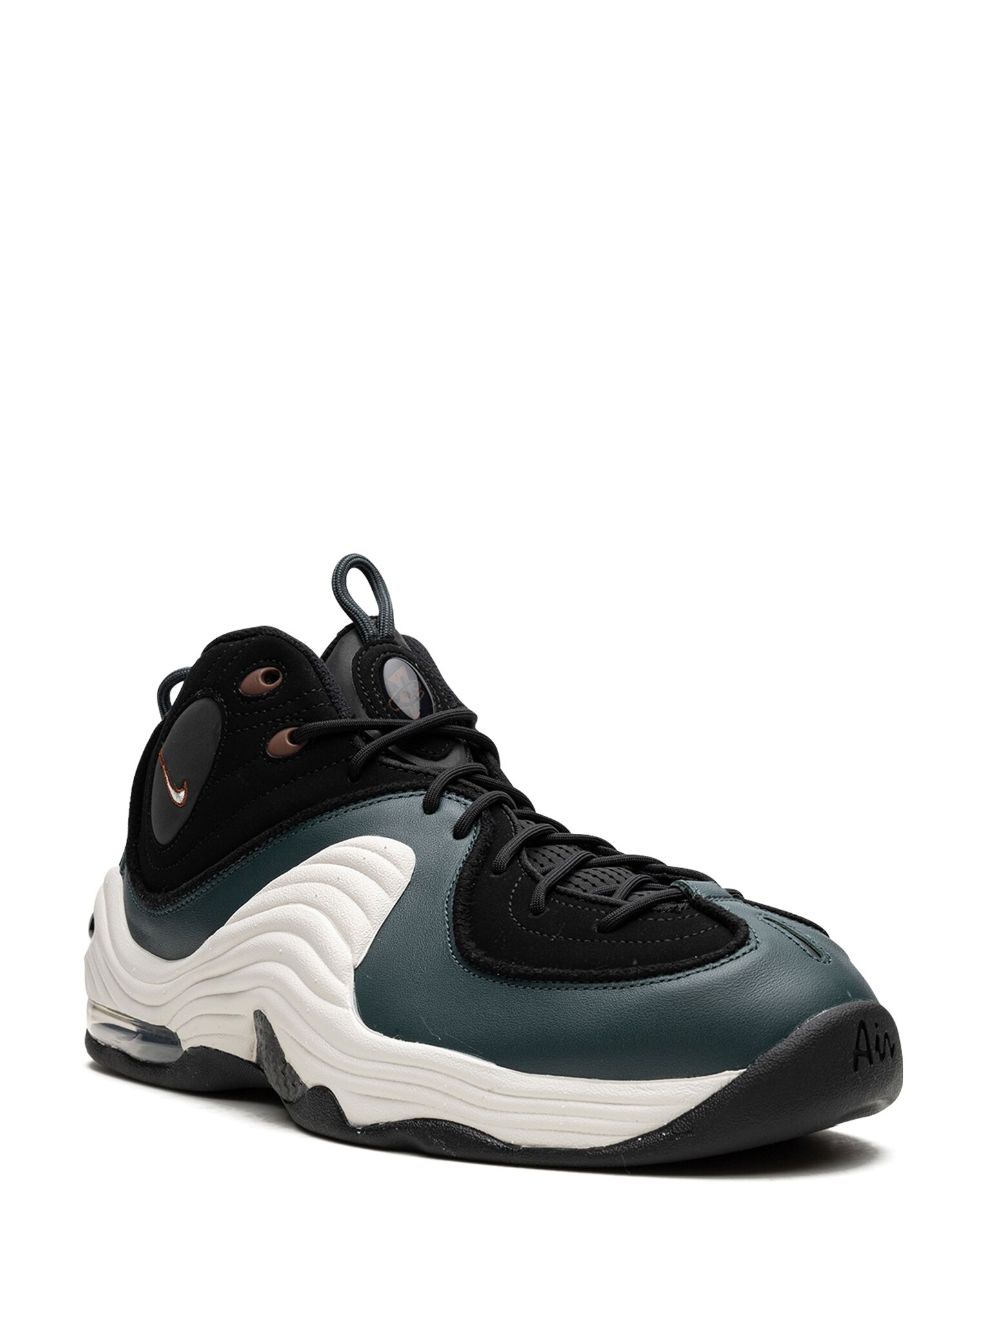 Image 2 of Nike Air Penny 2 "Faded Spruce" sneakers